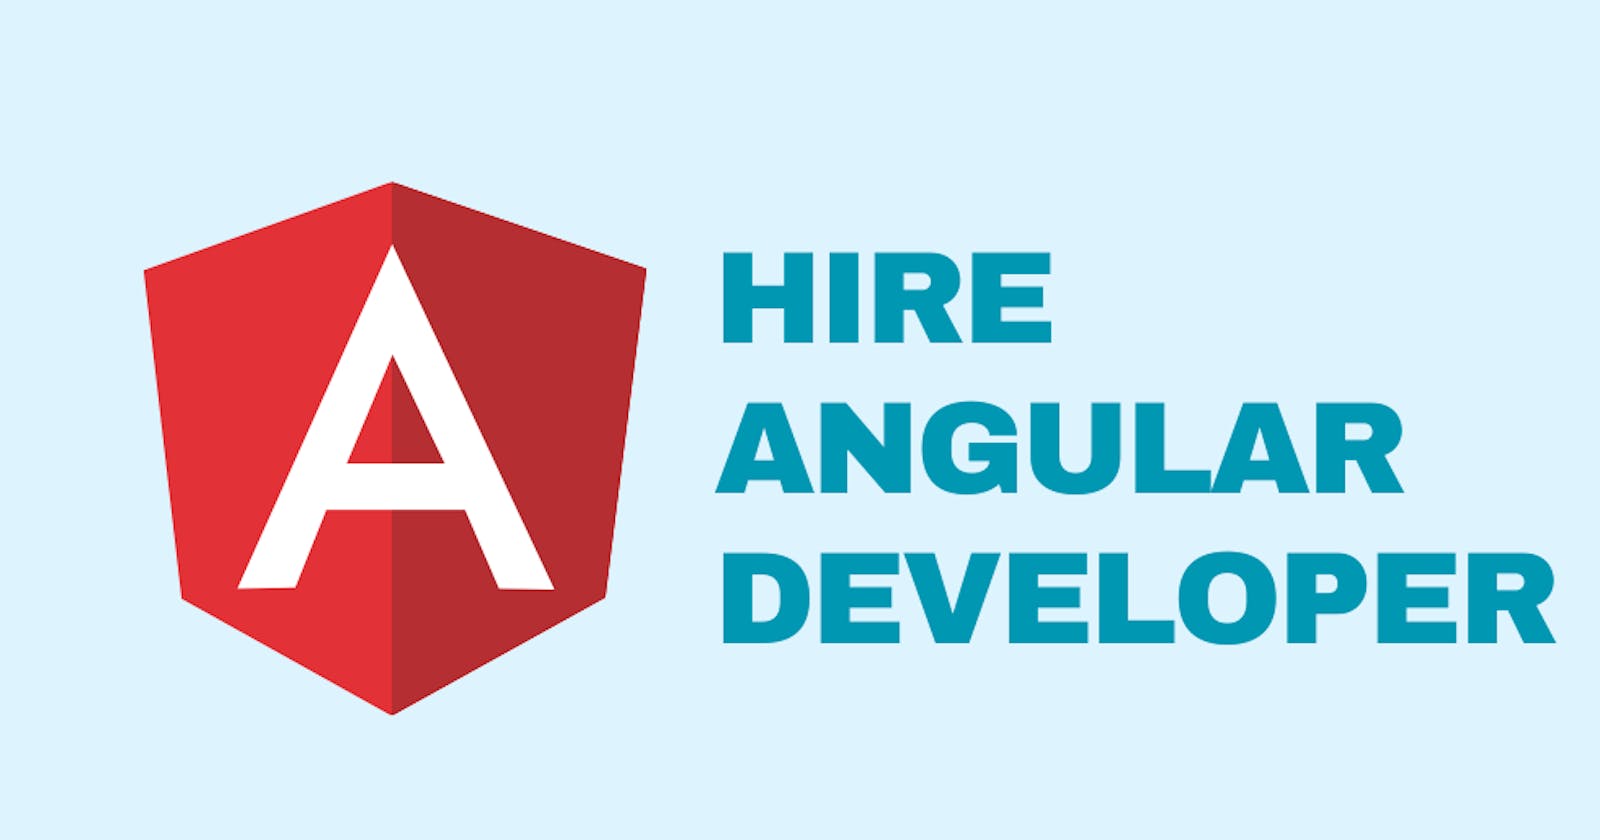 How to Hire an Angular Developer in 2023 - The Complete Guide